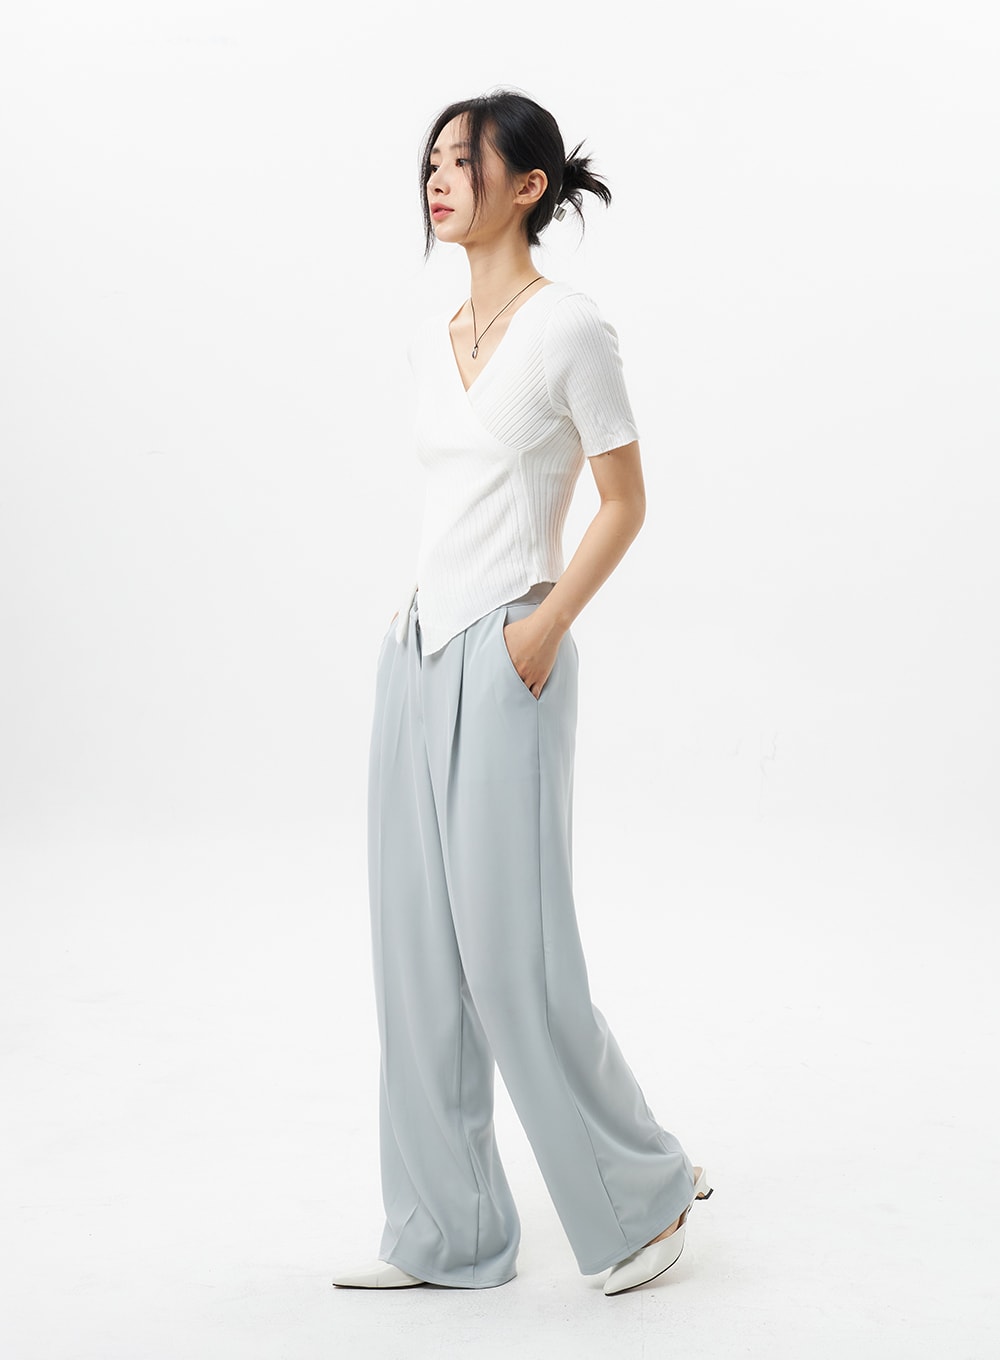 wide-tailored-pants-ol303